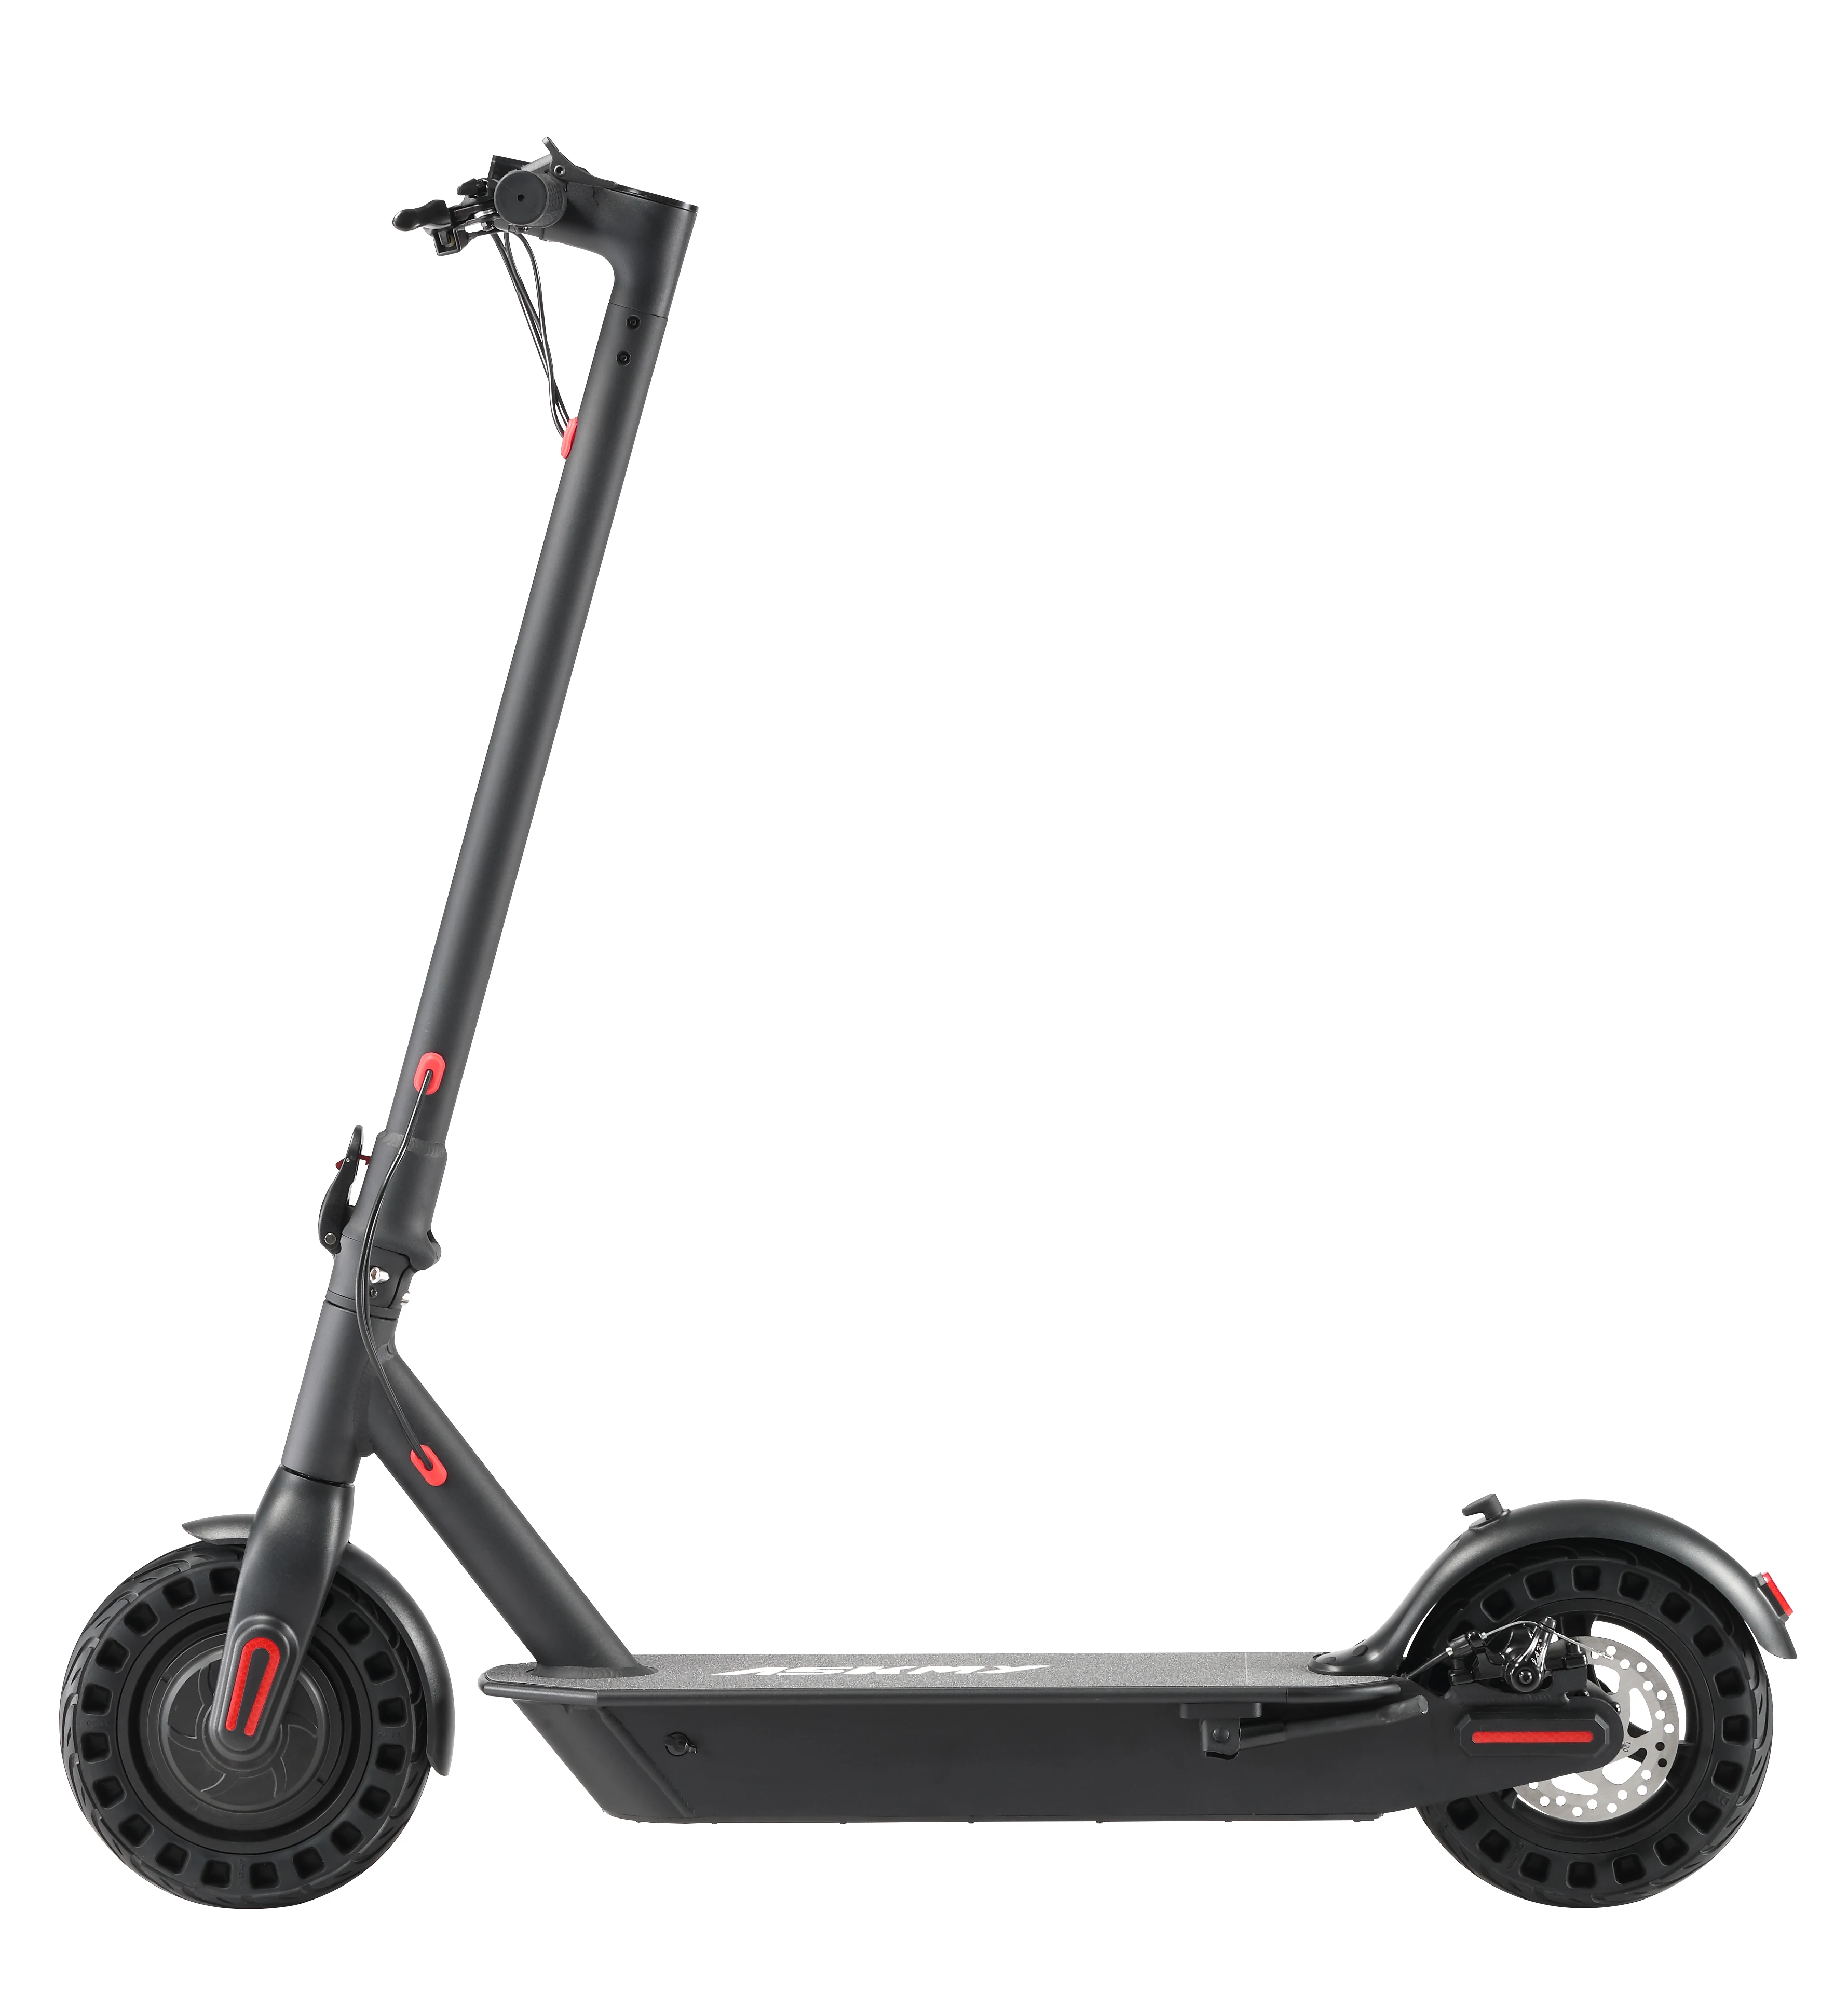 

Charger Charging Station Electric Cheap Scooters Kids Skateboard Big Boy Honeycomb Wheel Motorcycle Kick Ce E battry Scooter